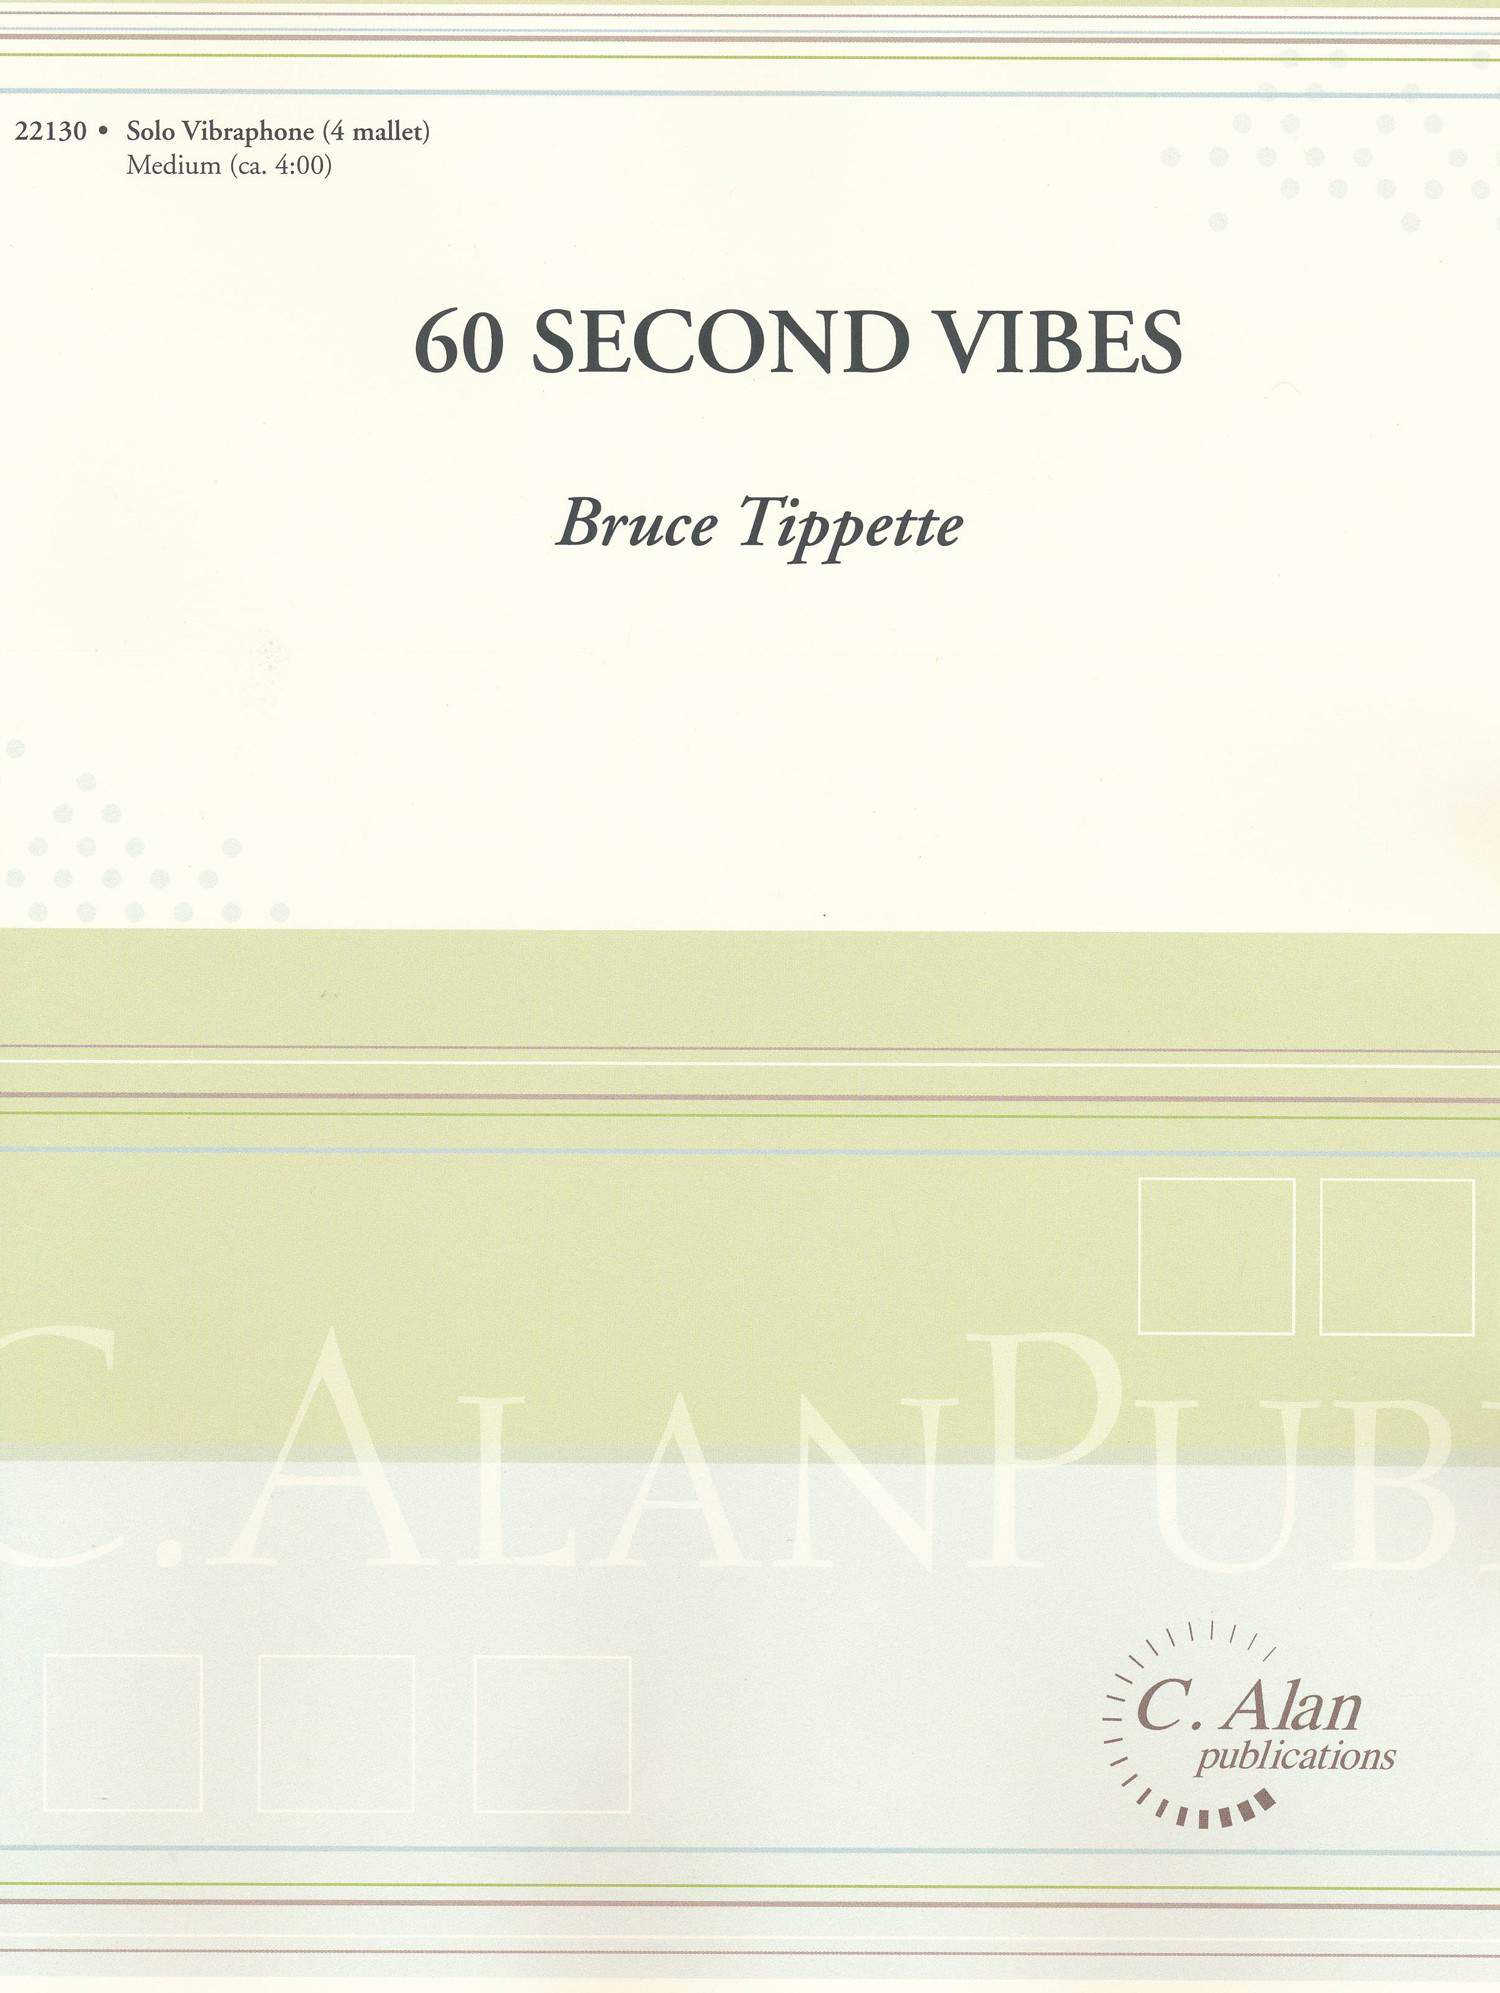 60 Second Vibes by Bruce Tippette